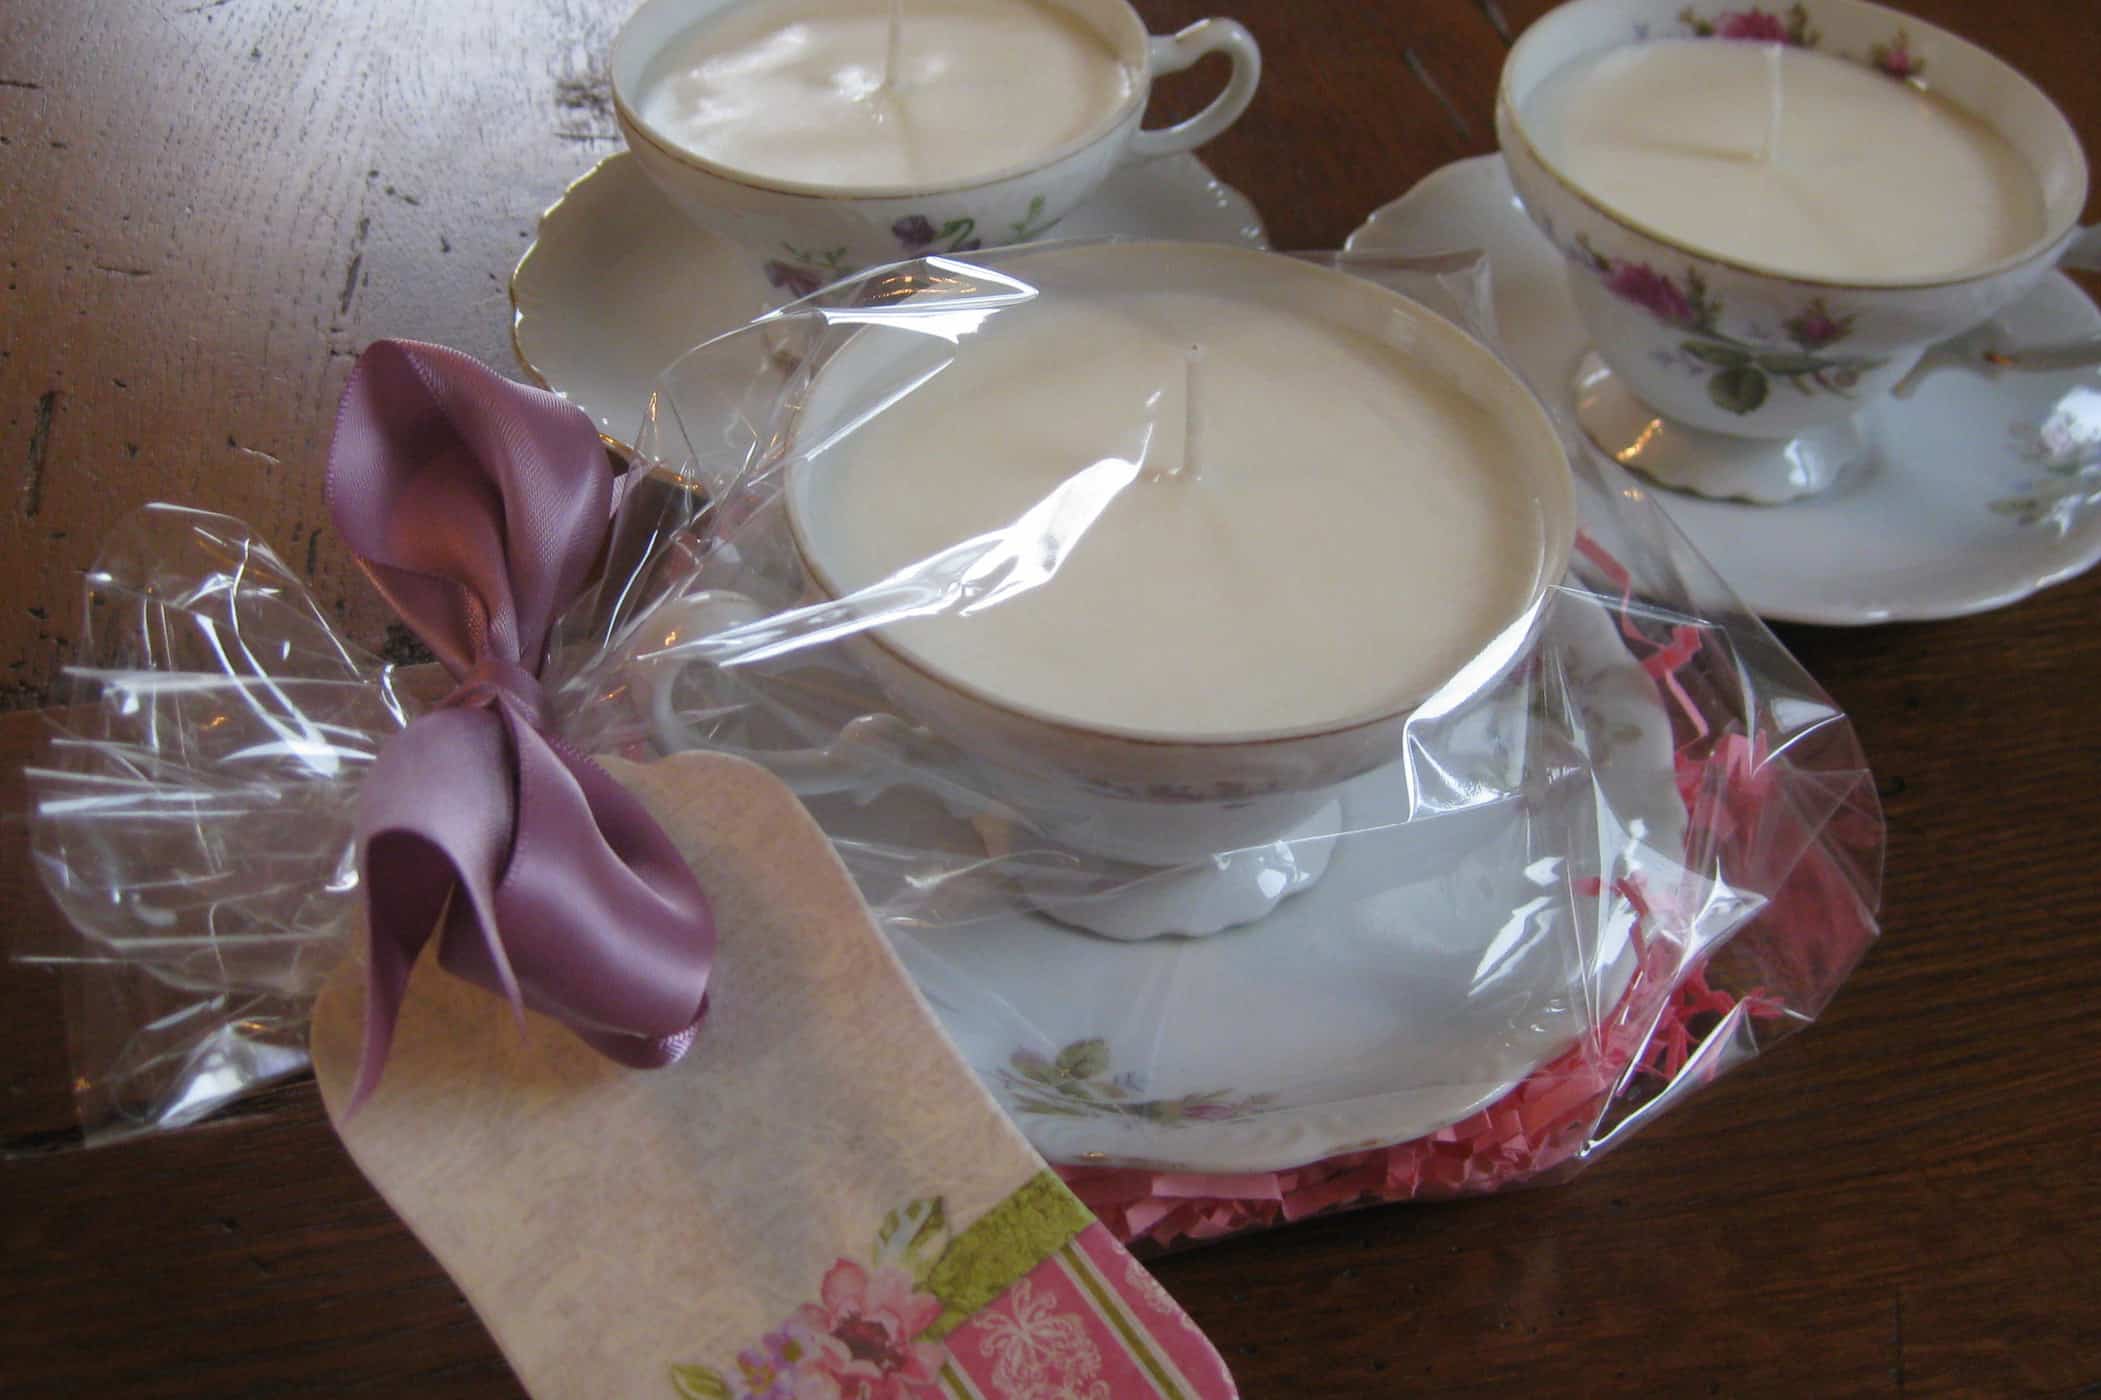 Party Favor Gift for Girlfriend Handmade Soy Candle in Vintage Teacup